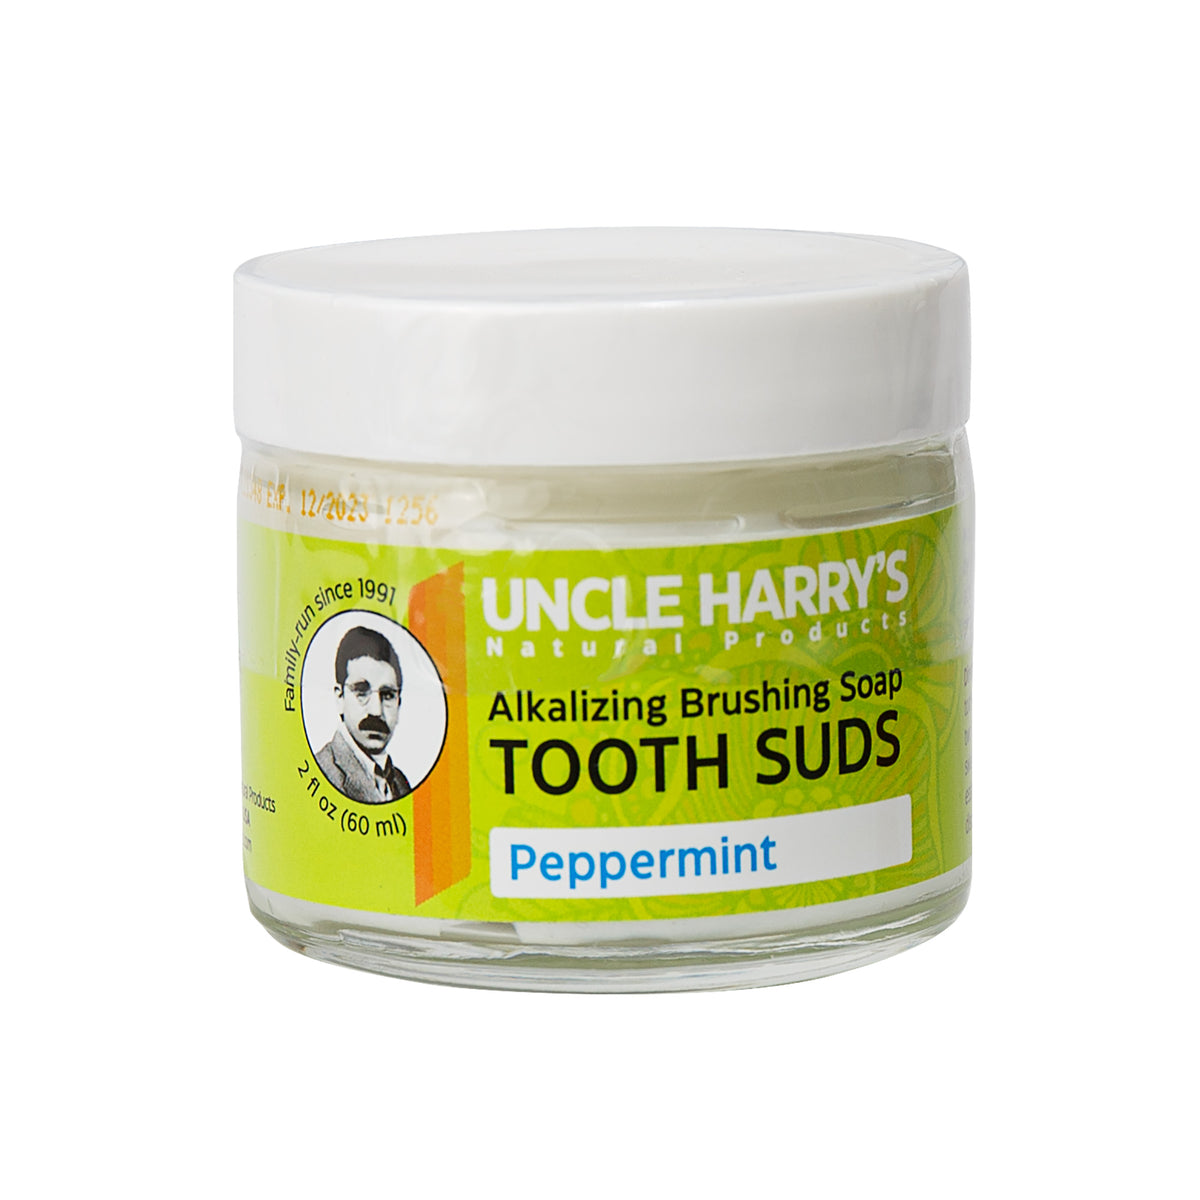 Primary image of Peppermint Brushing Soap Tooth Suds